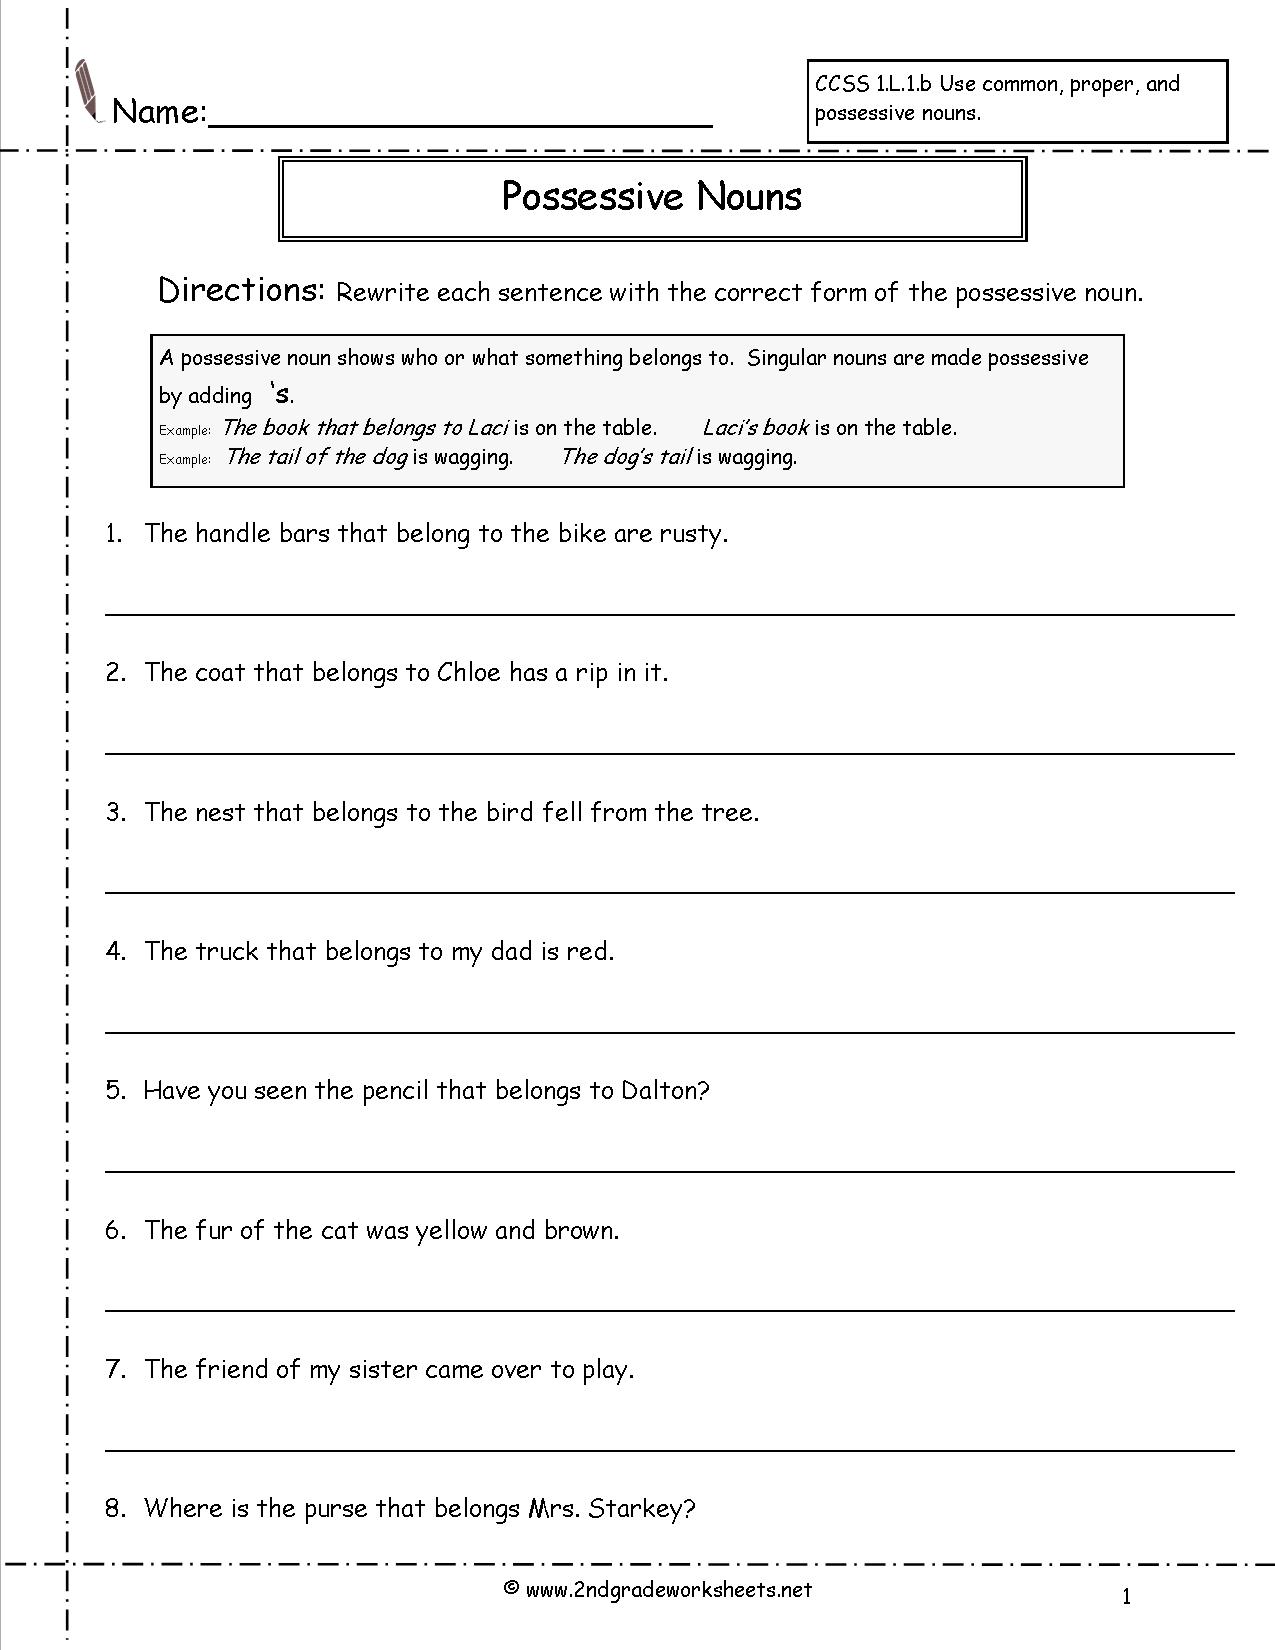 16-best-images-of-free-common-noun-printable-worksheets-free-noun-worksheets-noun-worksheet